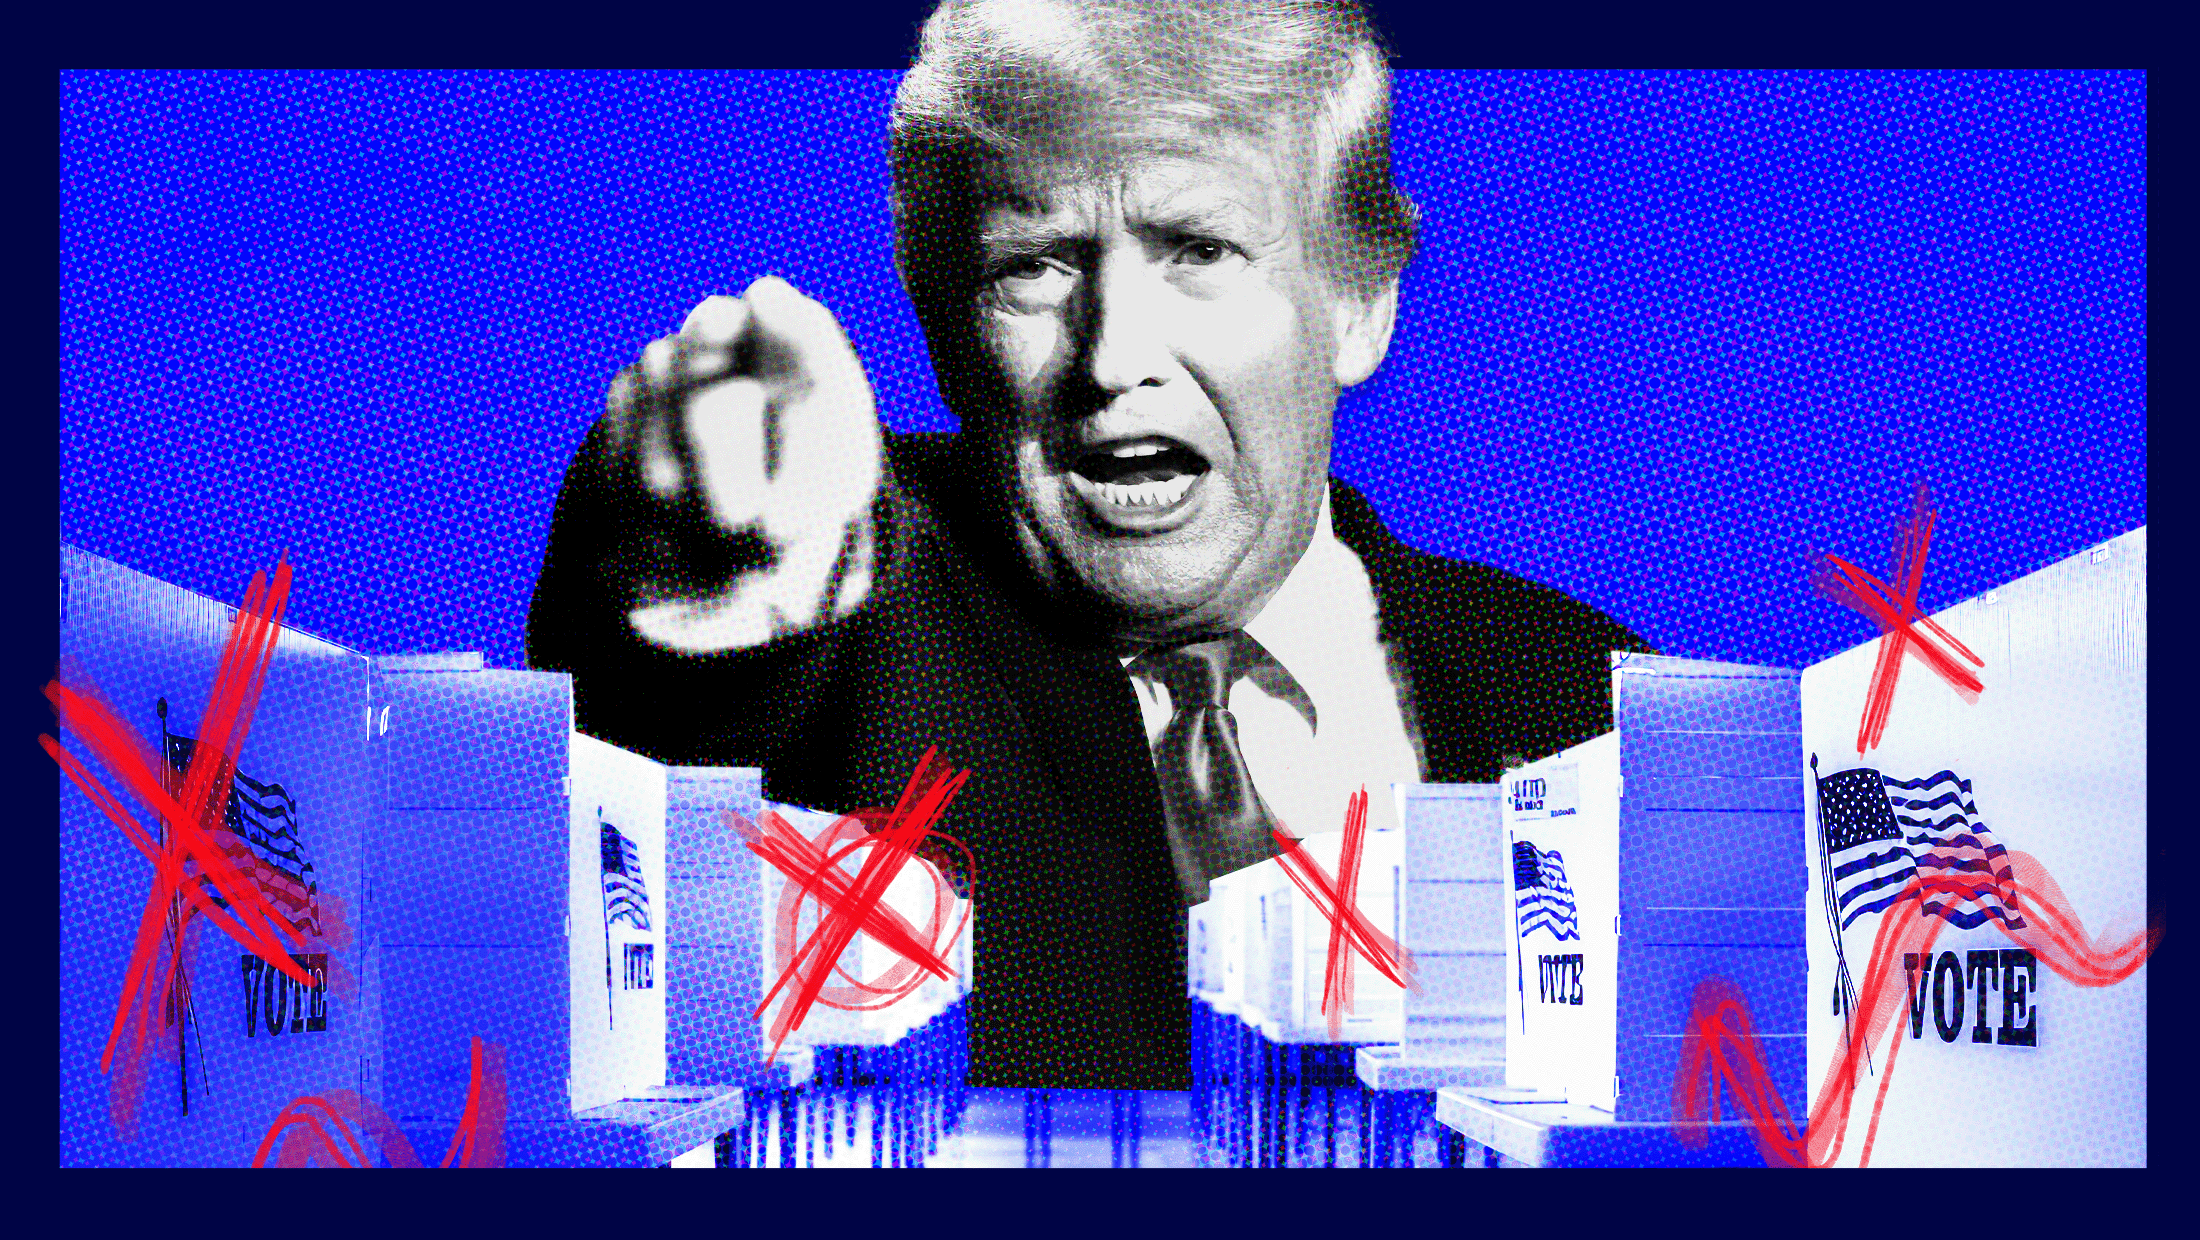 Blue background with image of Trump pointing at the viewer above a bunch of voting booths that have red X's on them.